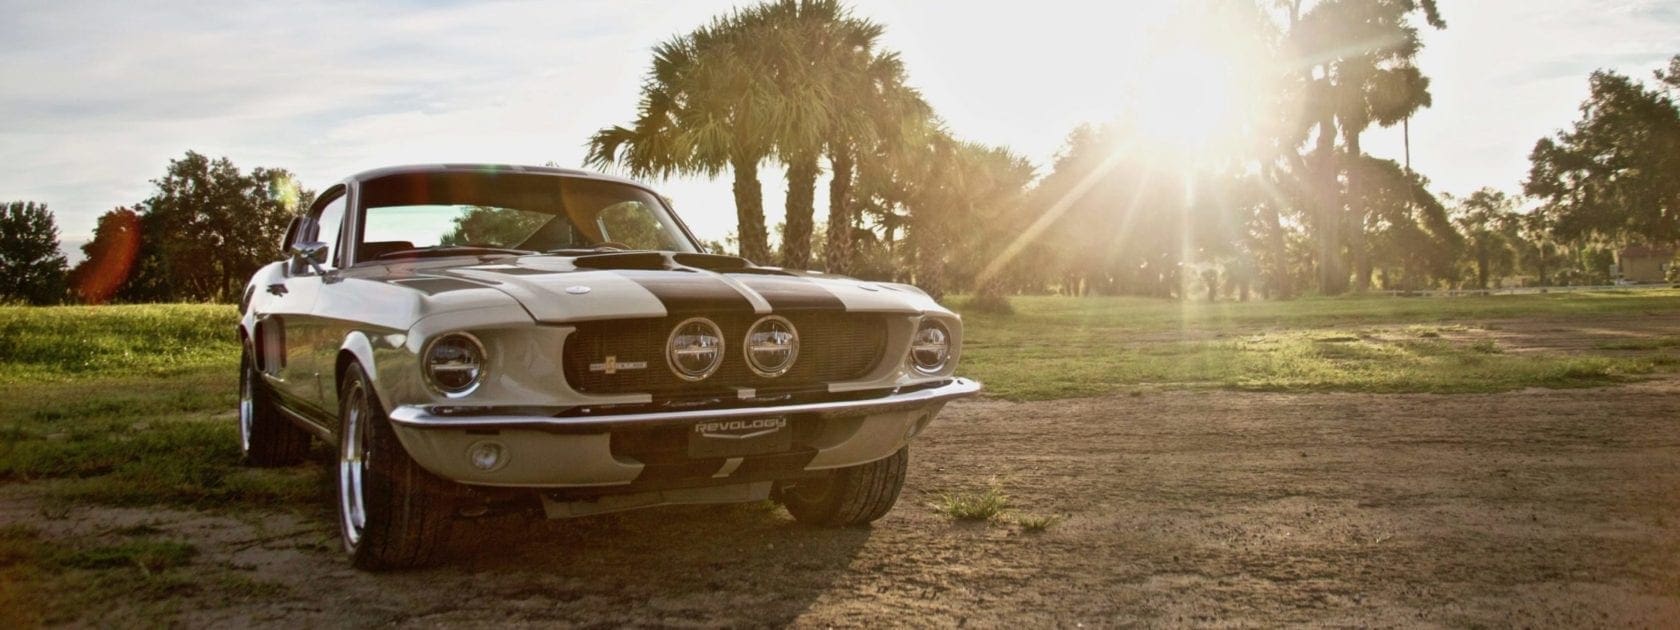 First replica ‘64 Ford Mustangs hit the market, at a thoroughbred price